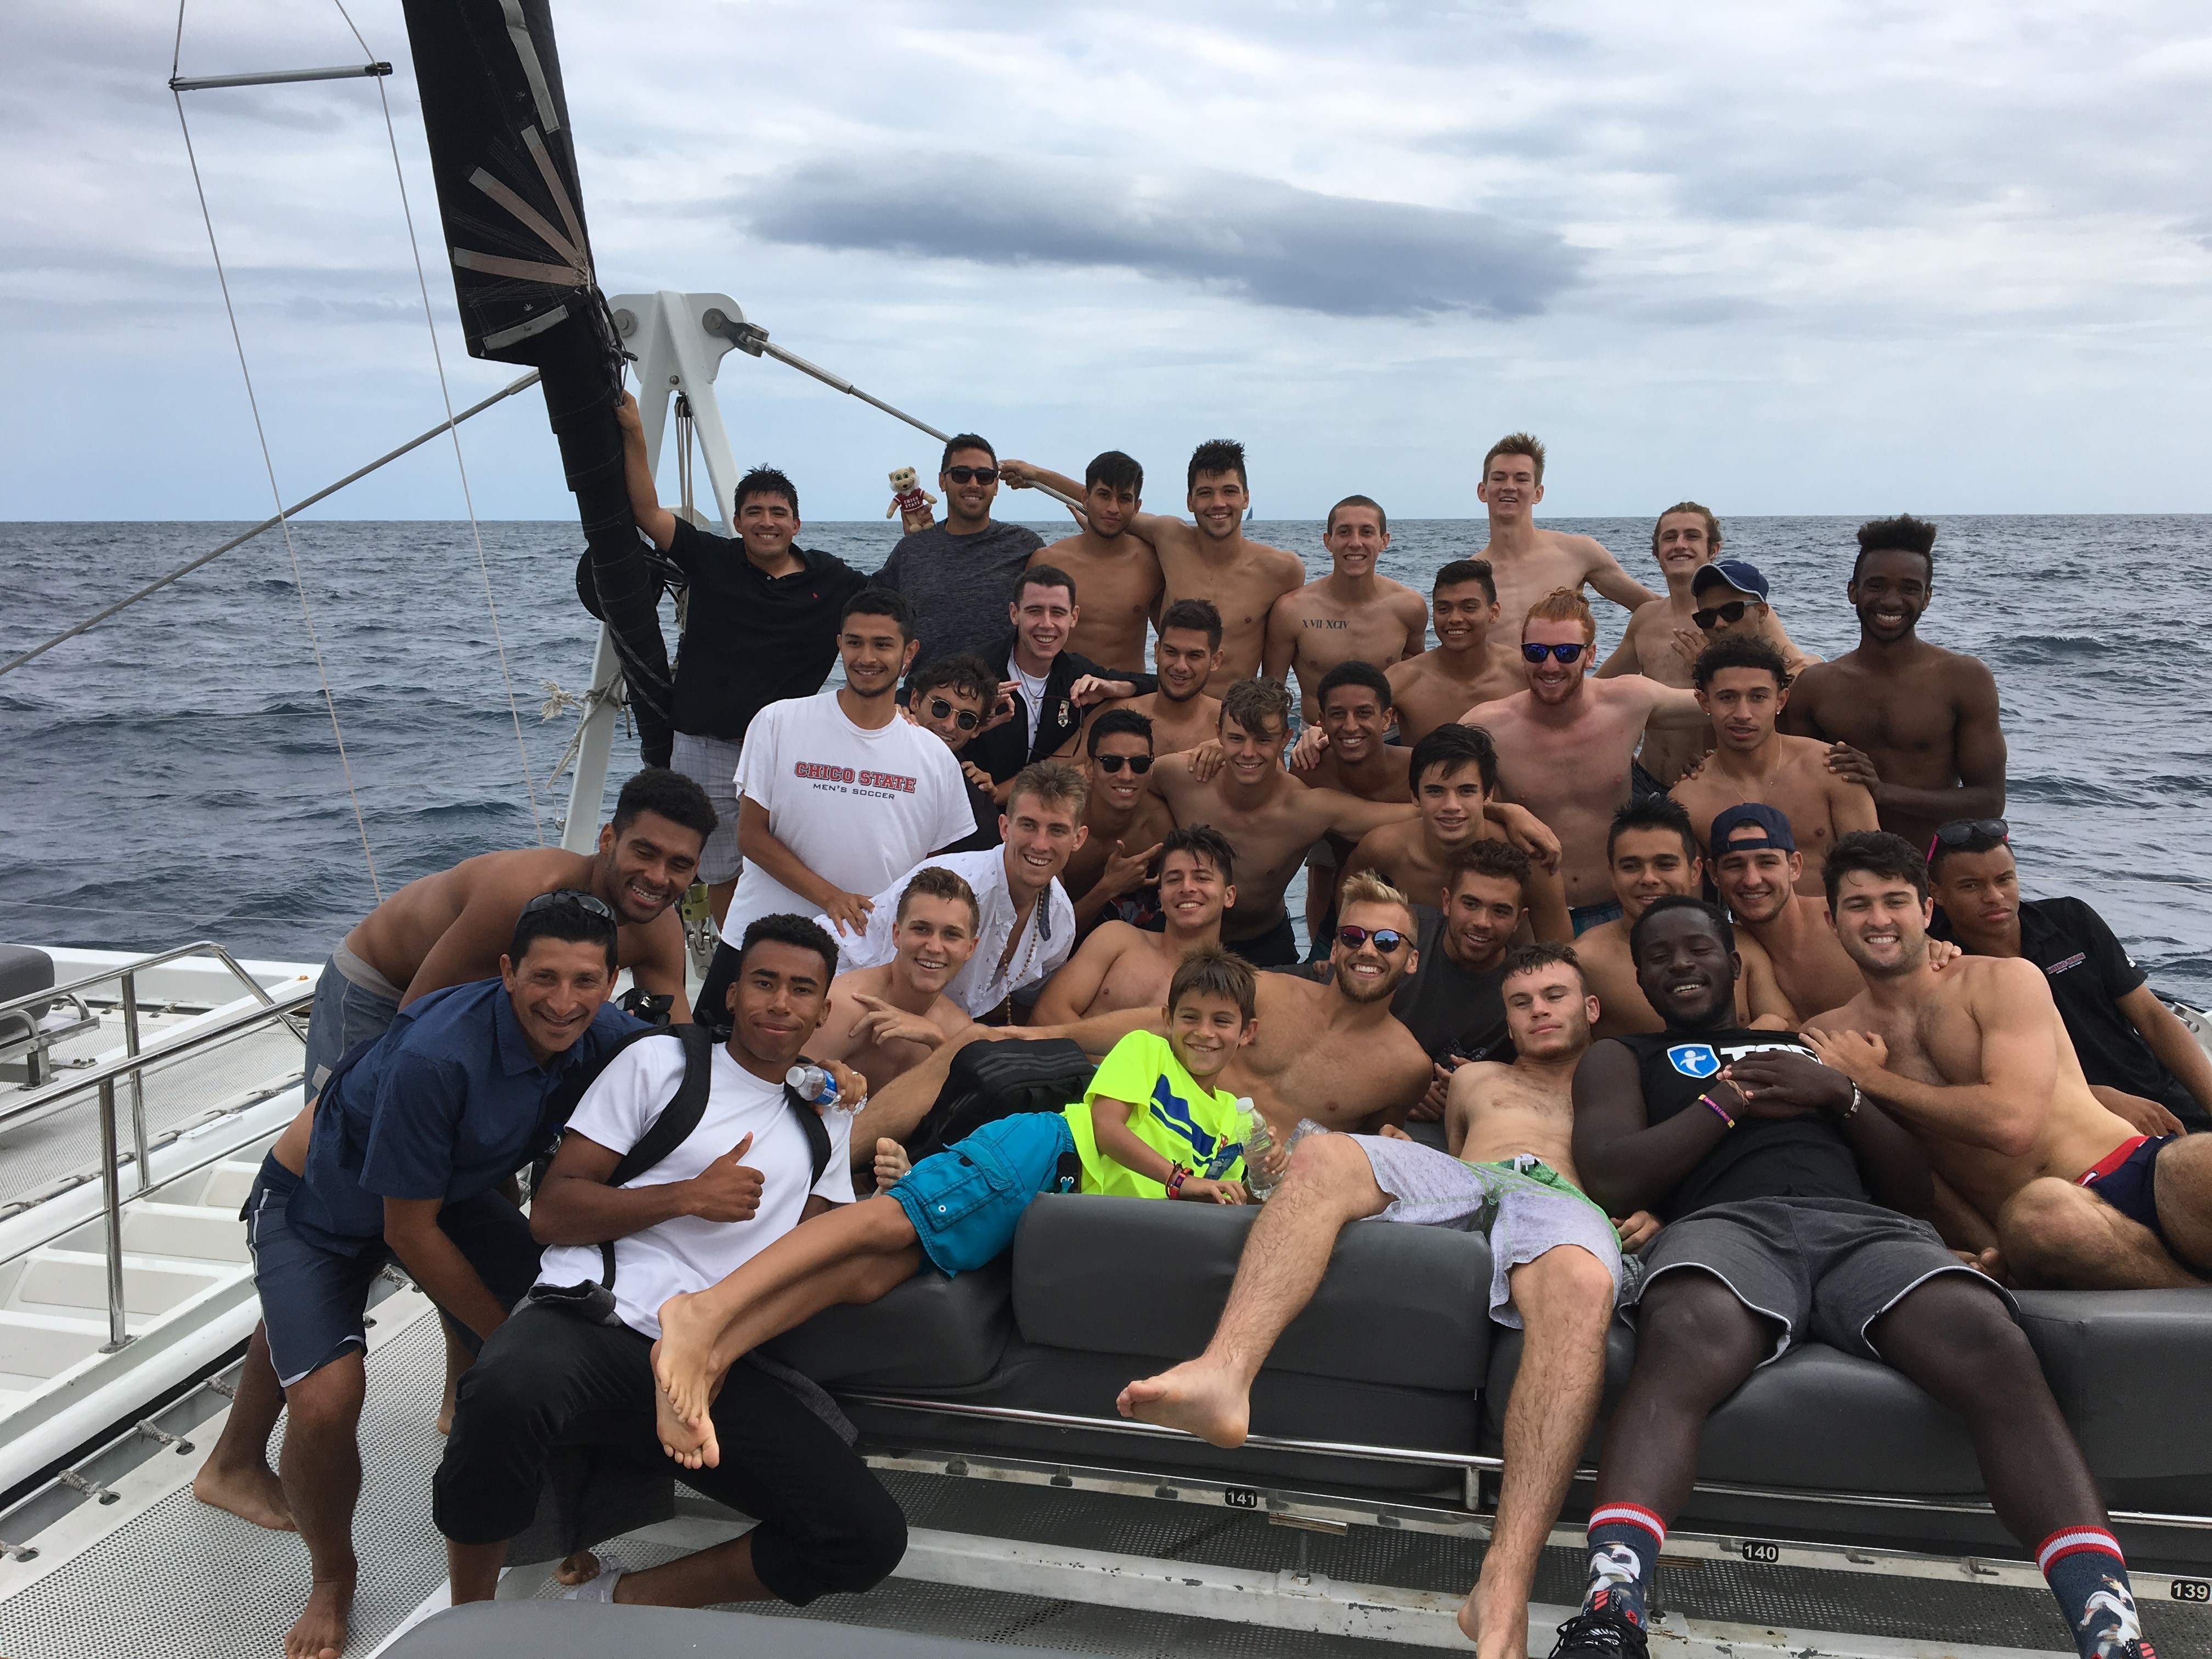 The Chico State men's soccer team took in the sights and sounds of Spain, both on land and in the Mediterranean Sea,